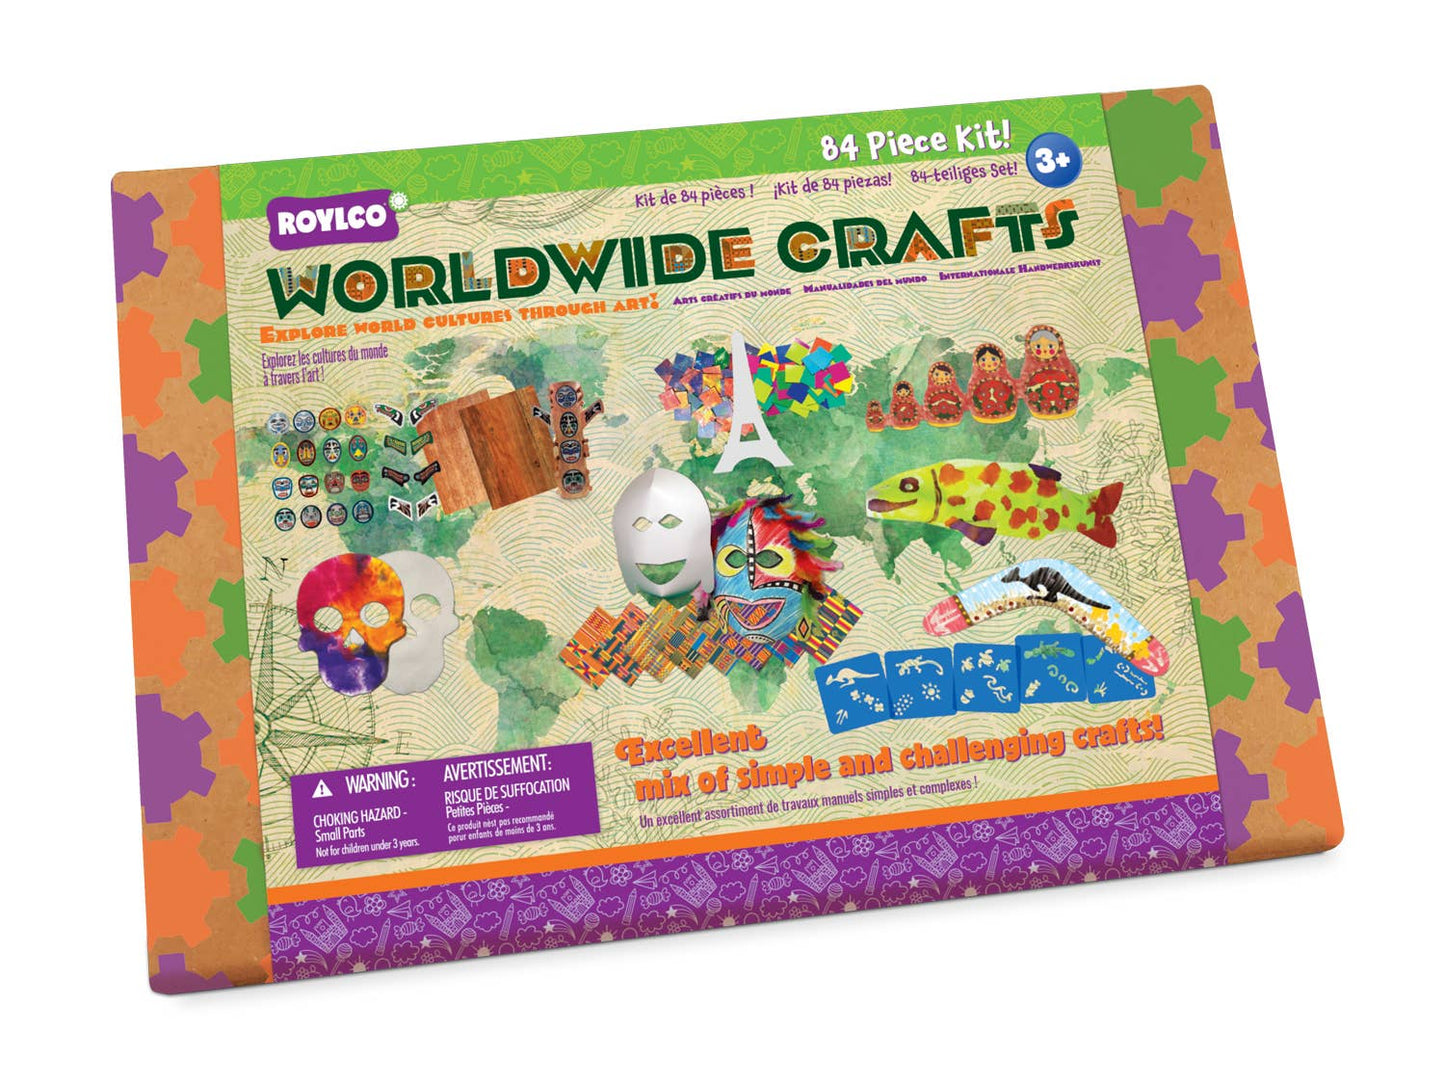 Worldwide arts and crafts multi-cultural kit